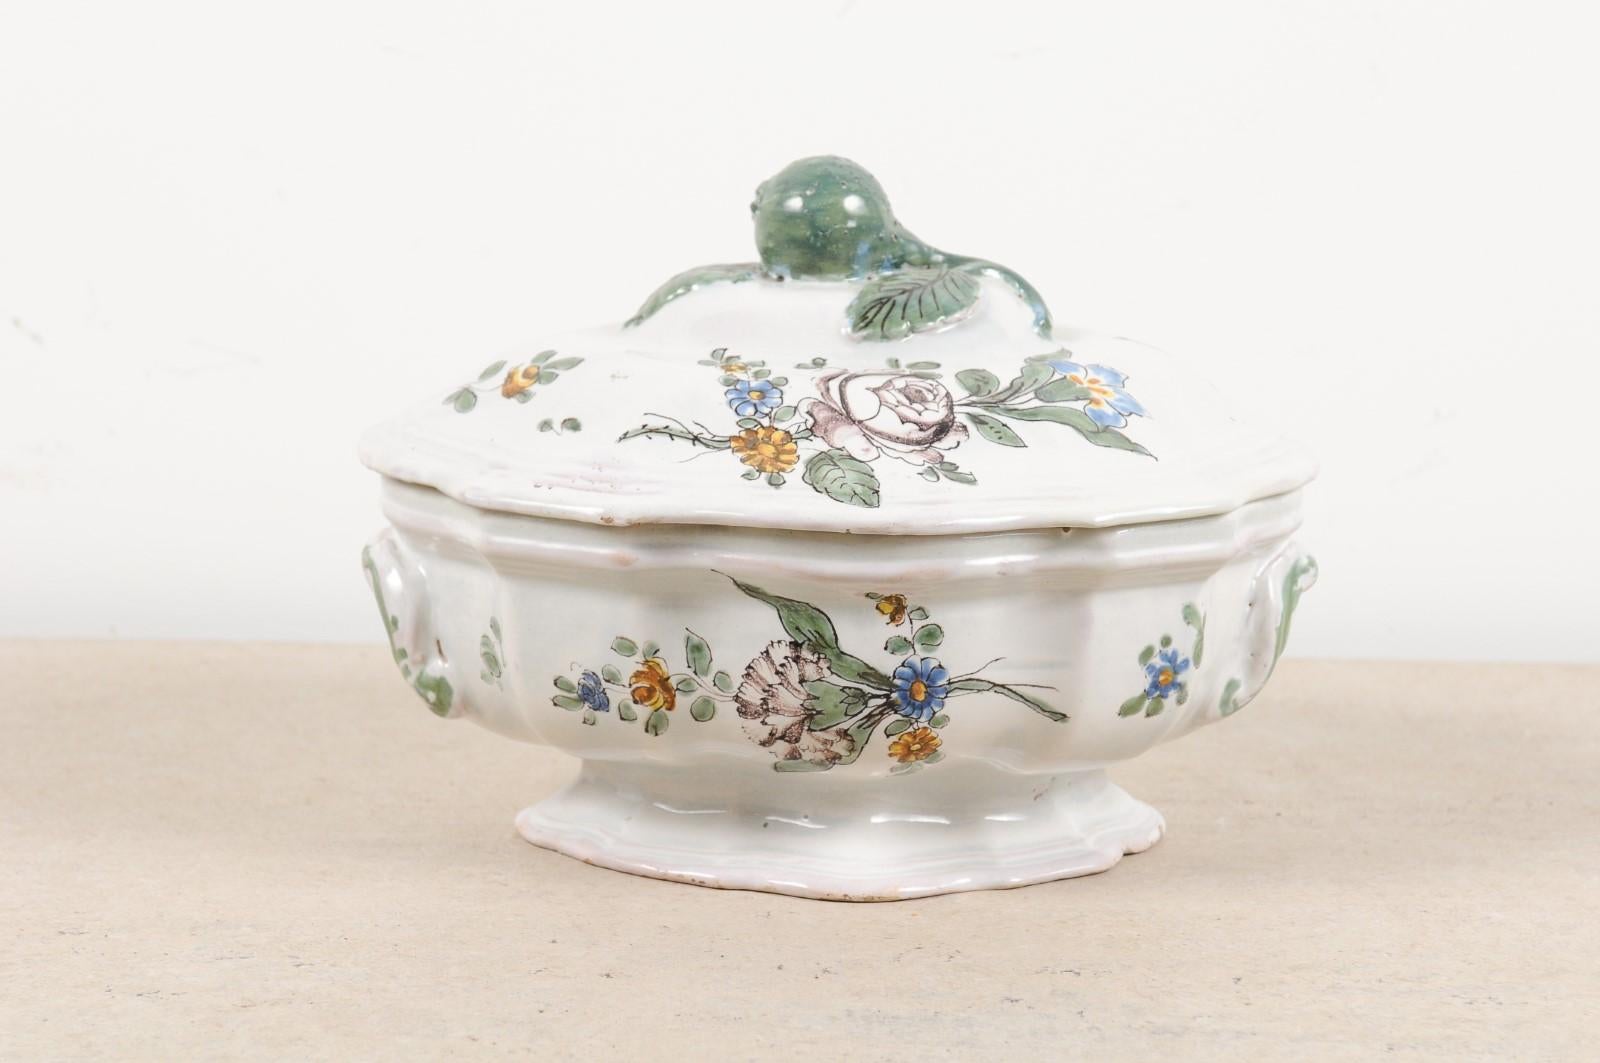 A French faïence mid-18th century oval-shaped soup tureen from Bordeaux with floral decor. Created in Southwestern France during the reign of King Louis XV, this soup tureen features an oval shape perfectly complimented by a delicate floral decor.